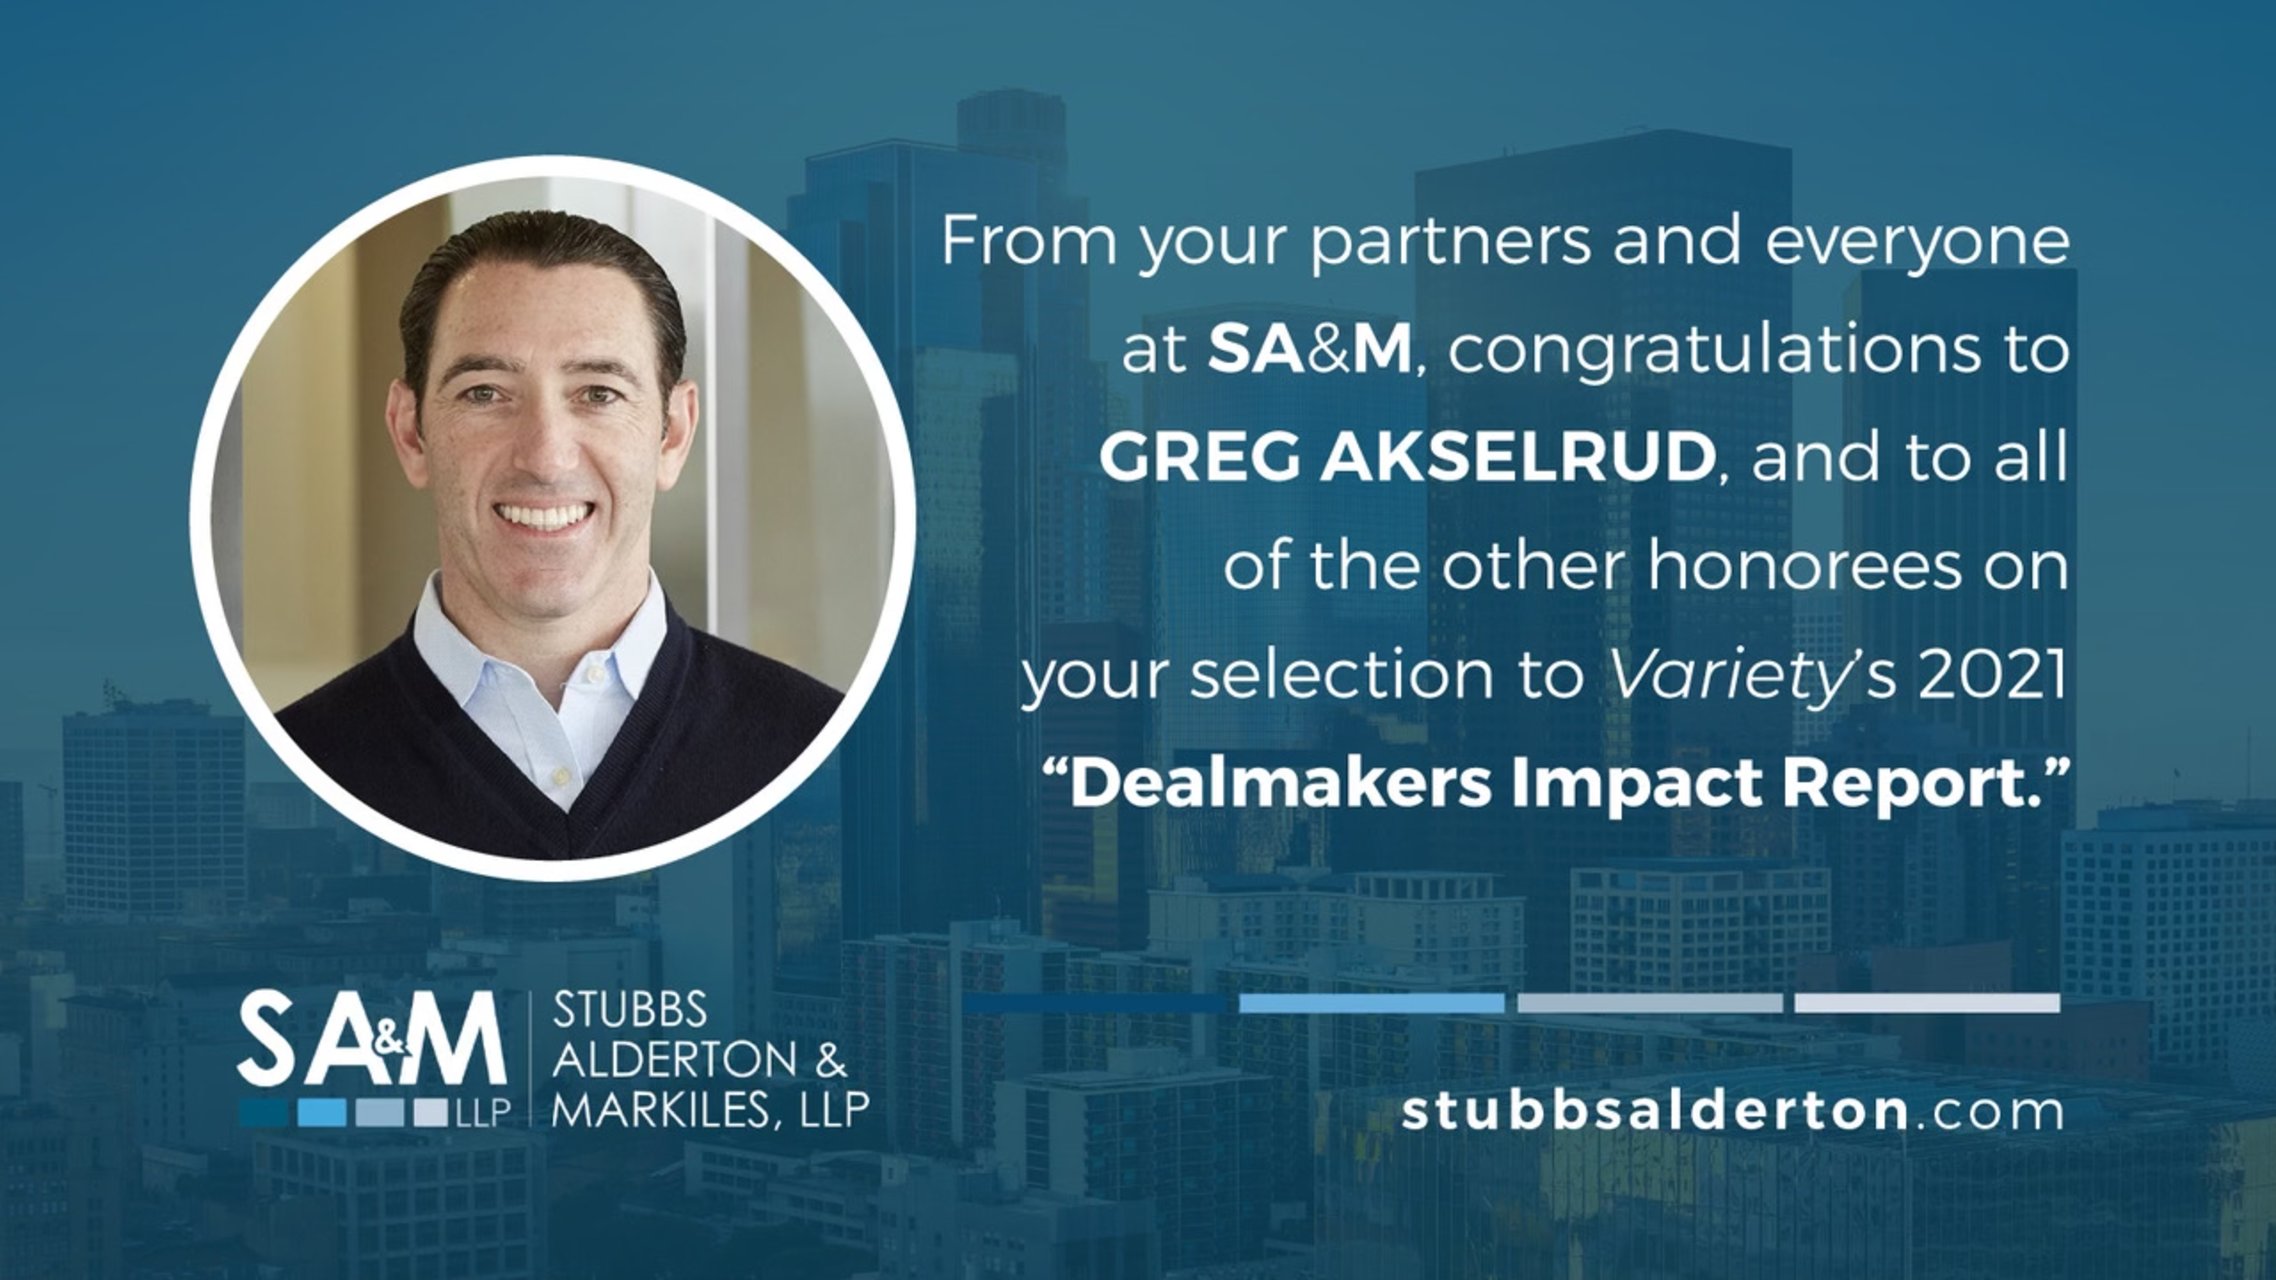 Greg Akselrud Named to Variety’s 2021 “Dealmakers Impact Report”